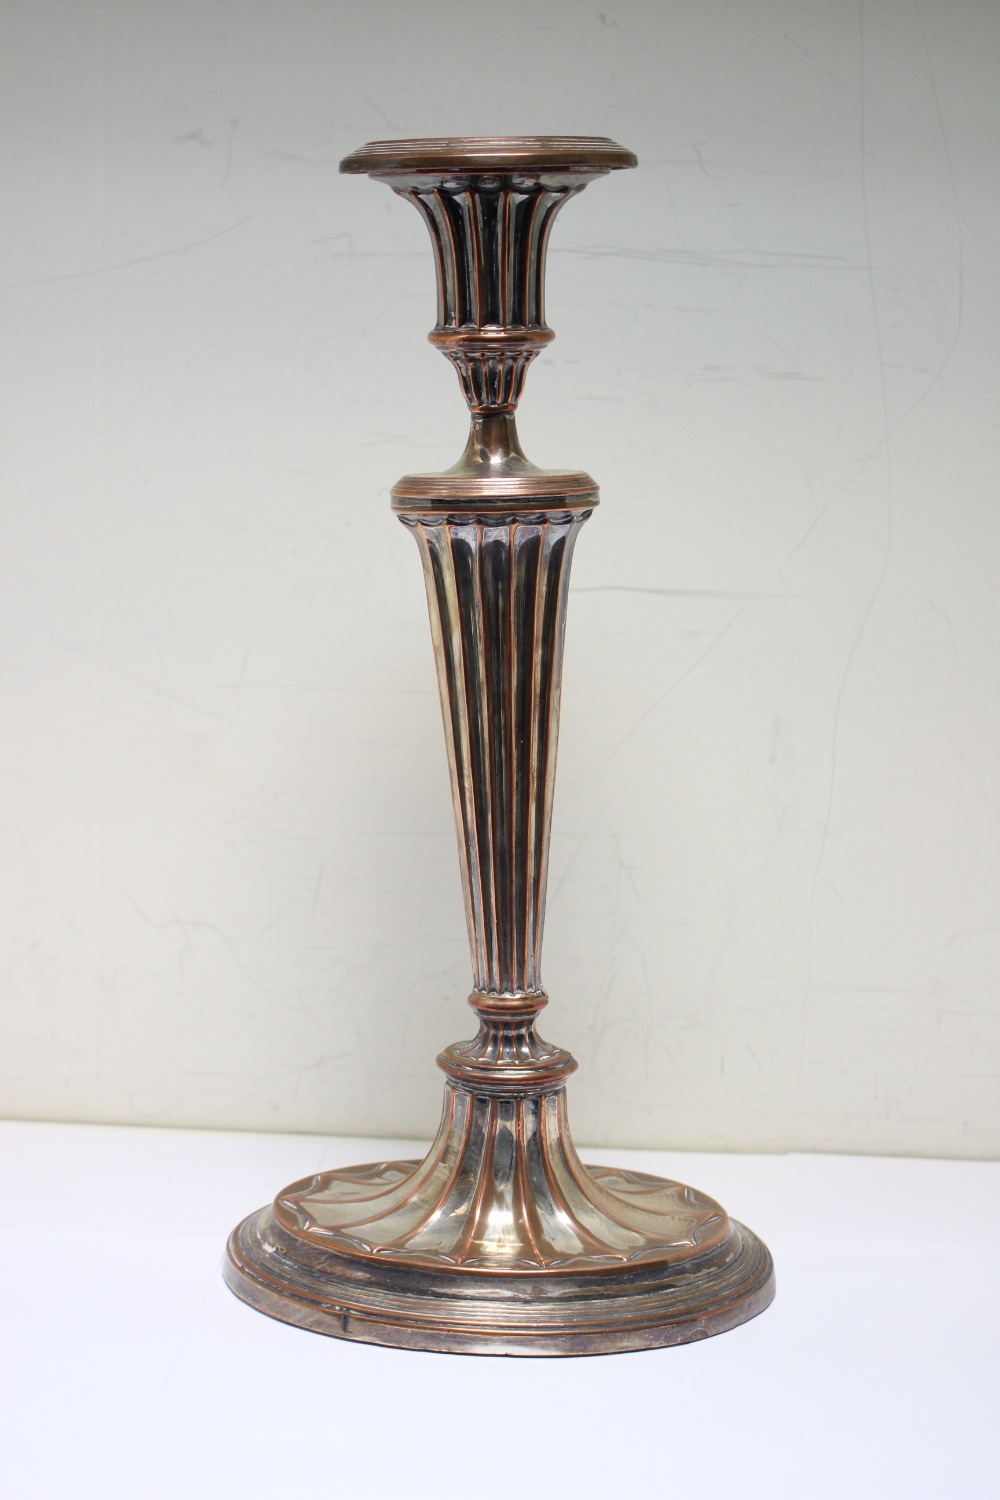 A pair of Old Sheffield plate Adam style candlesticks, with oval fan fluted bases, 31cm high - Image 2 of 2